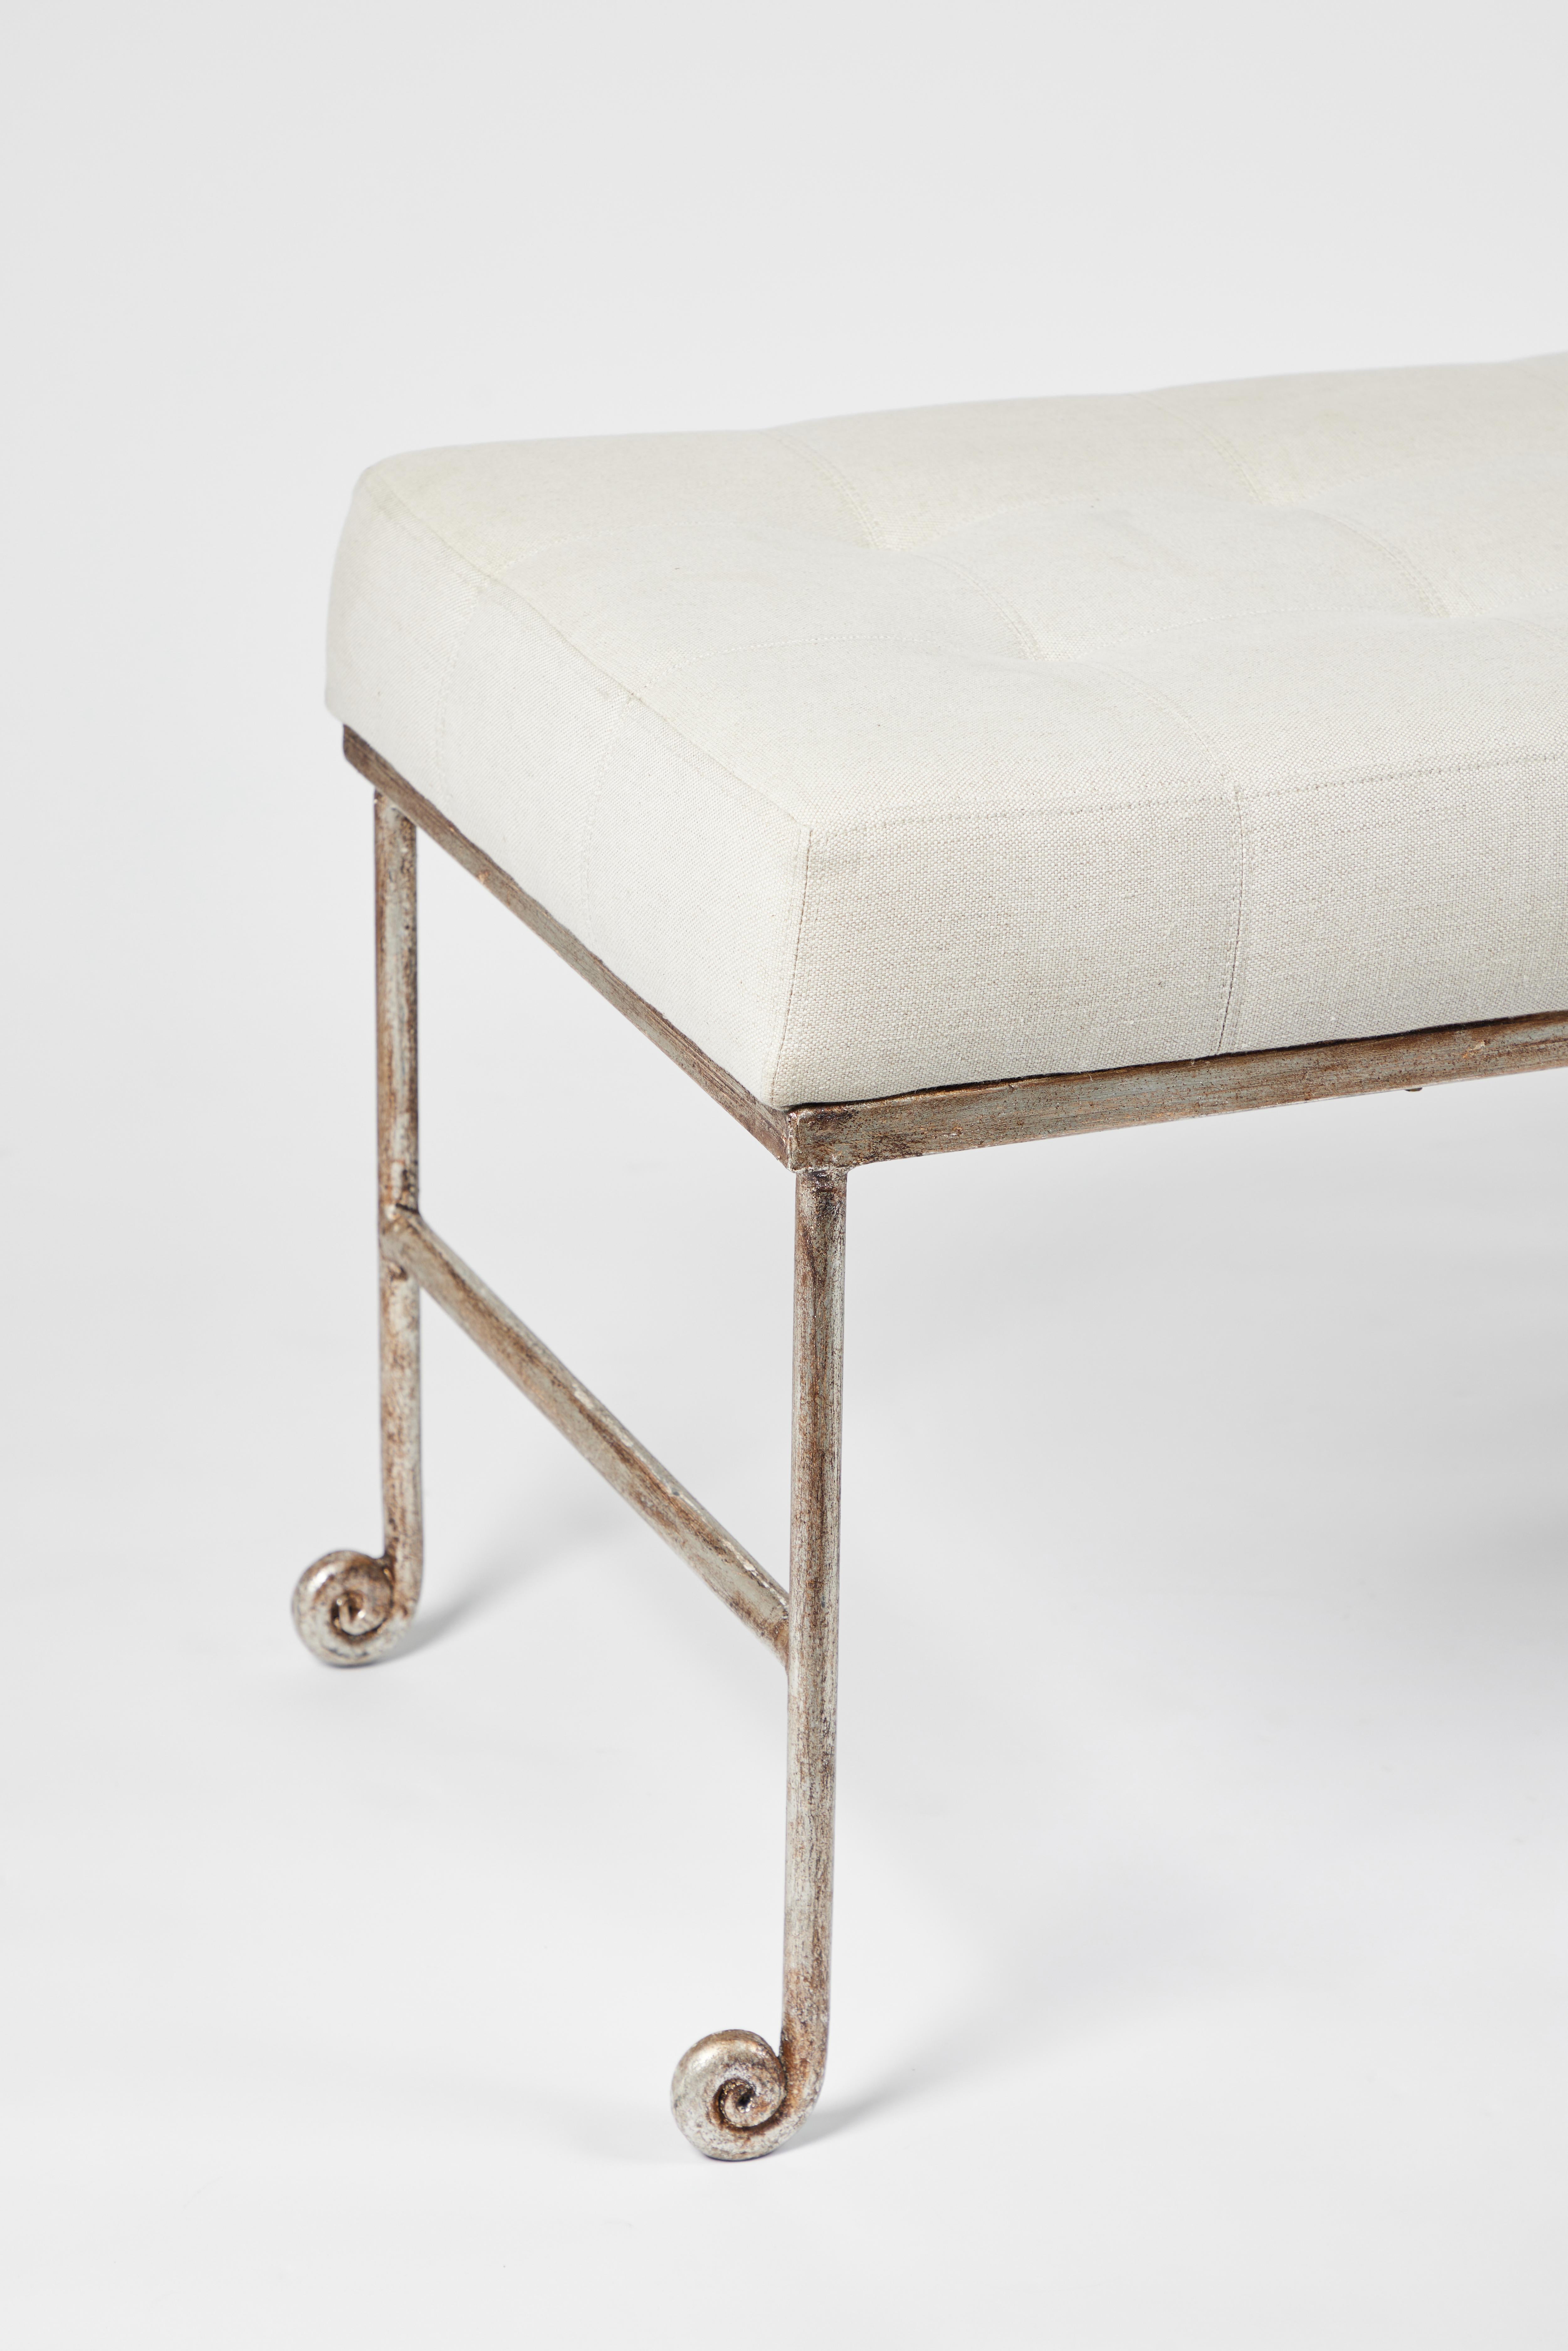 Contemporary Tufted Linen and Silvered Iron Bench by Horchow